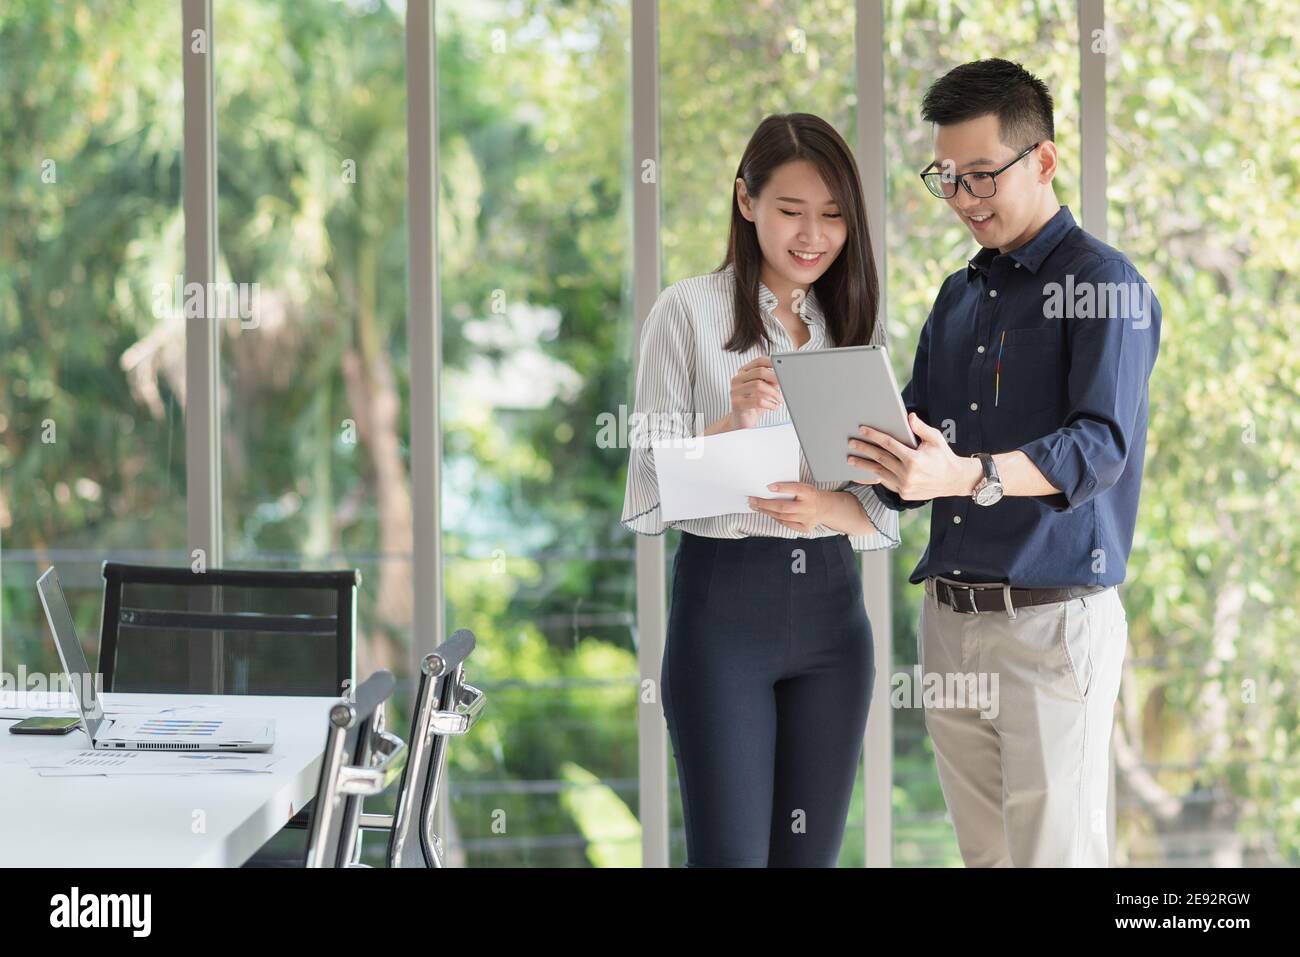 Business employee meeting and discussion with powerful teamwork at company office with positive attitude. Stock Photo